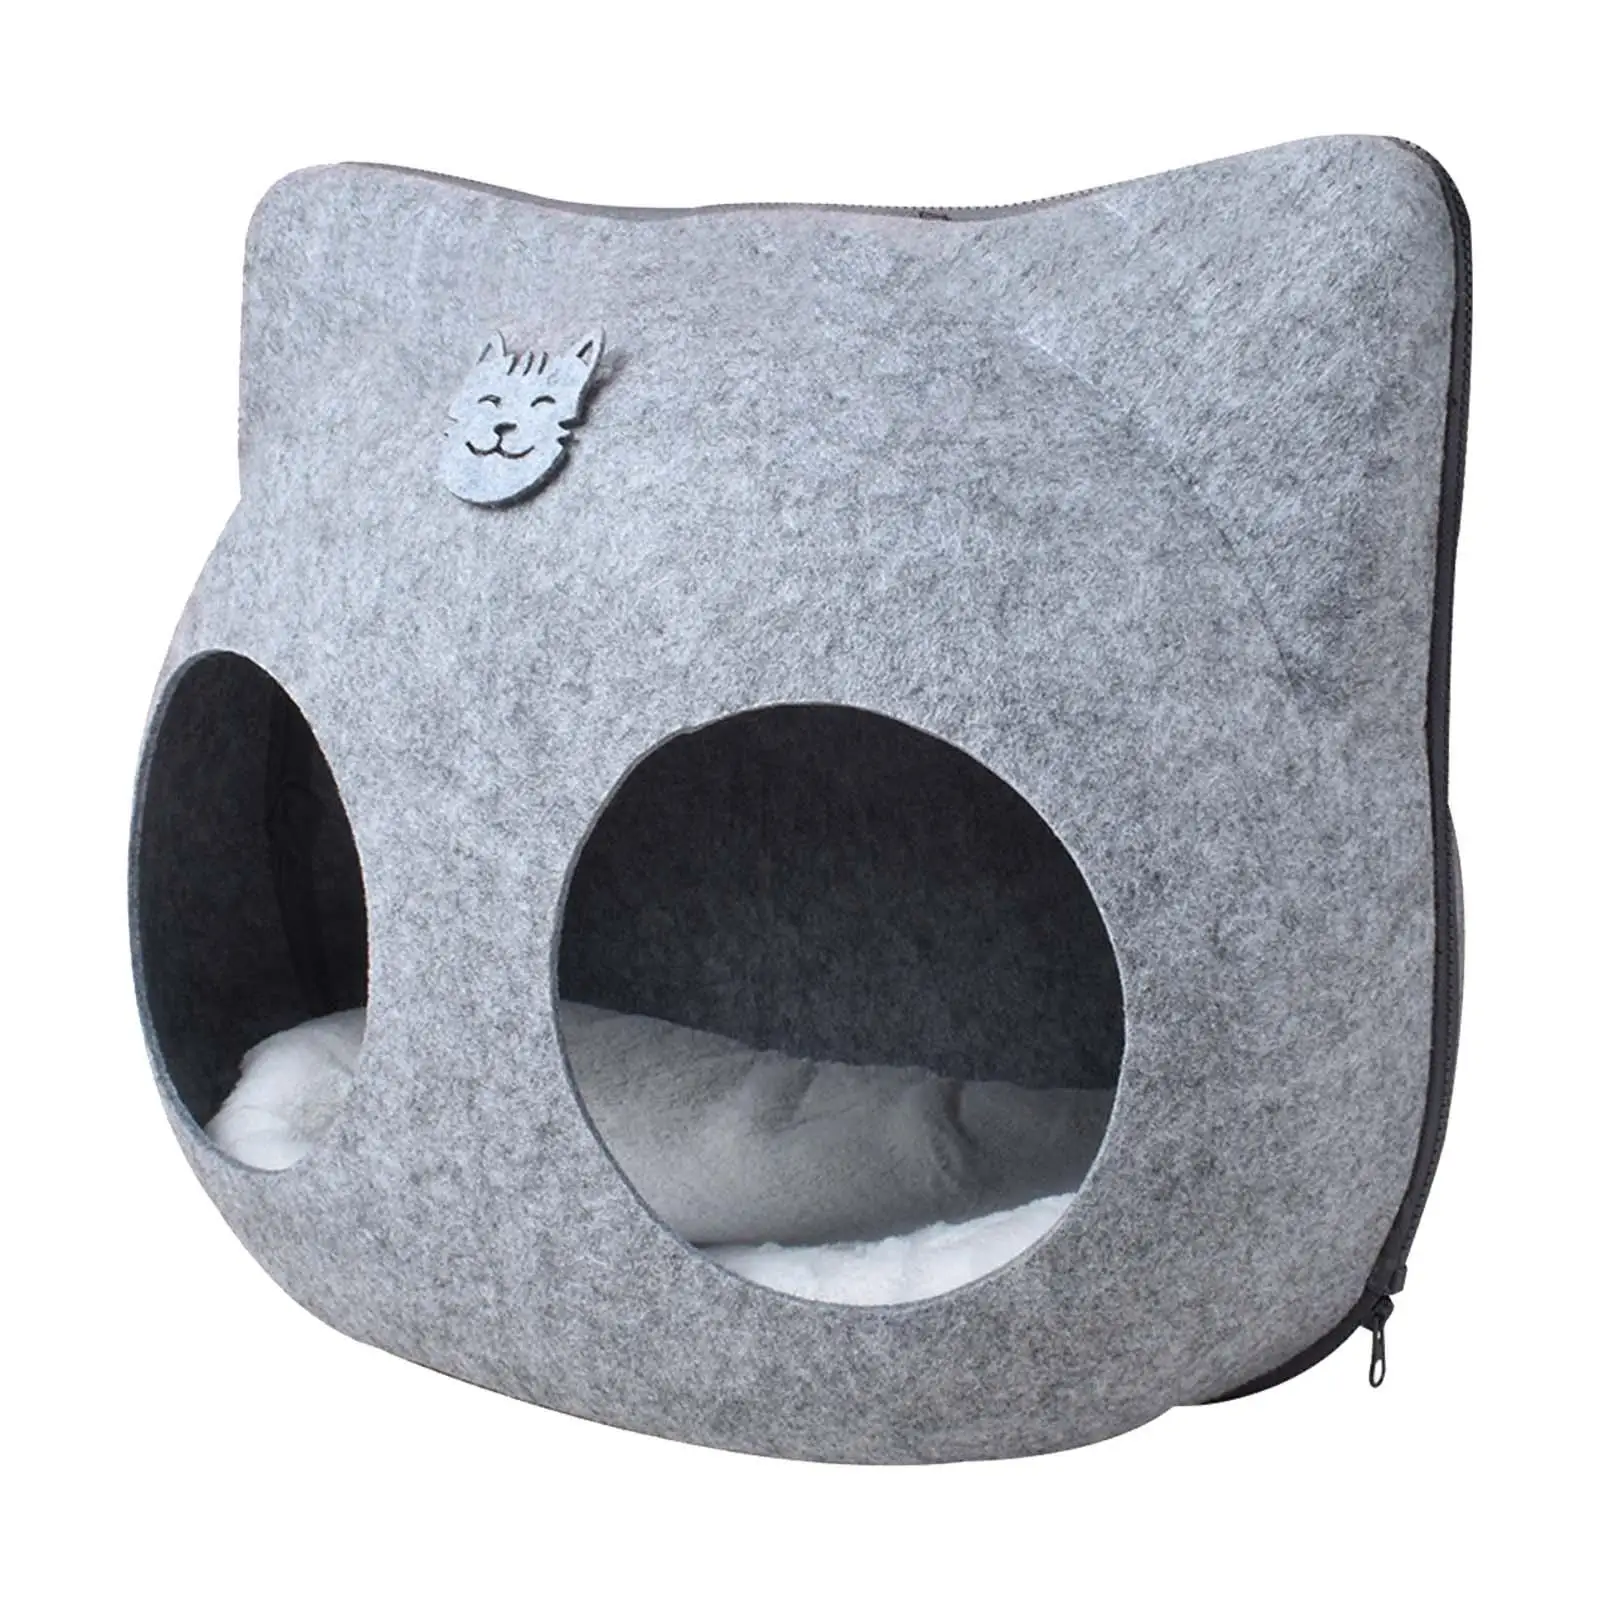 Bed Cute Enclosed Cat Bed Felt Cat Bed Cave Toy Detachable Cat Nest Pet Sleeping Bed Washable for Dogs Cat Home Winter